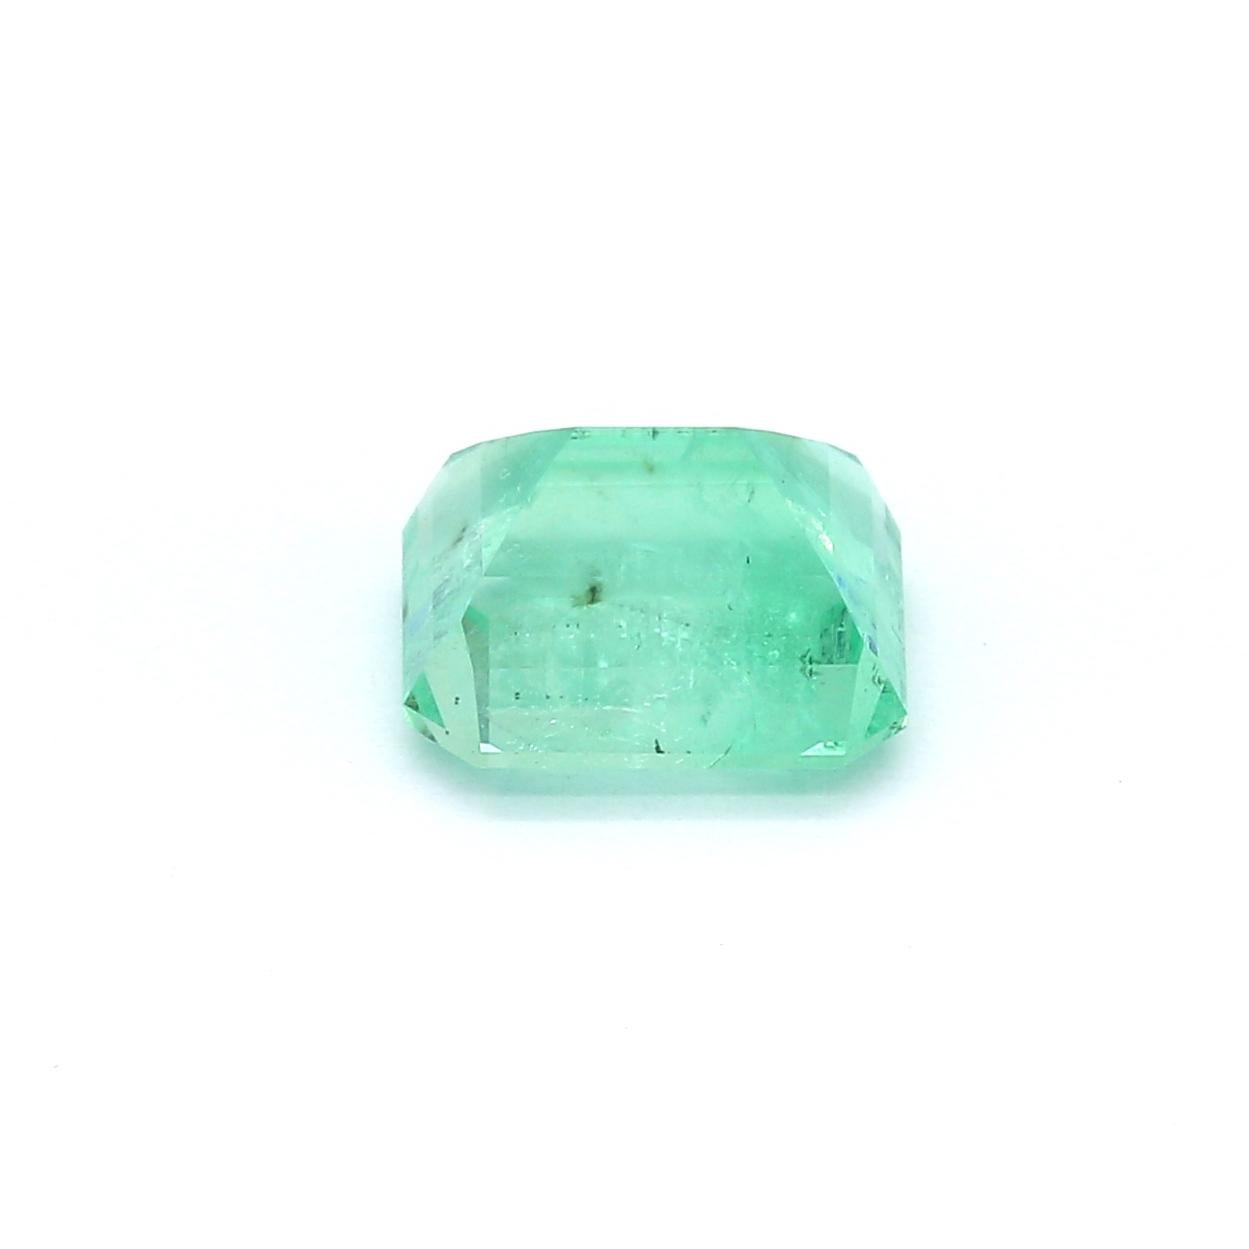 An amazing Russian Emerald which allows jewelers to create a unique piece of wearable art.
This exceptional quality gemstone would make a custom-made jewelry design. Perfect for a Ring or Pendant.

Shape - Octagon
Weight - 2.63 ct
Treatment -